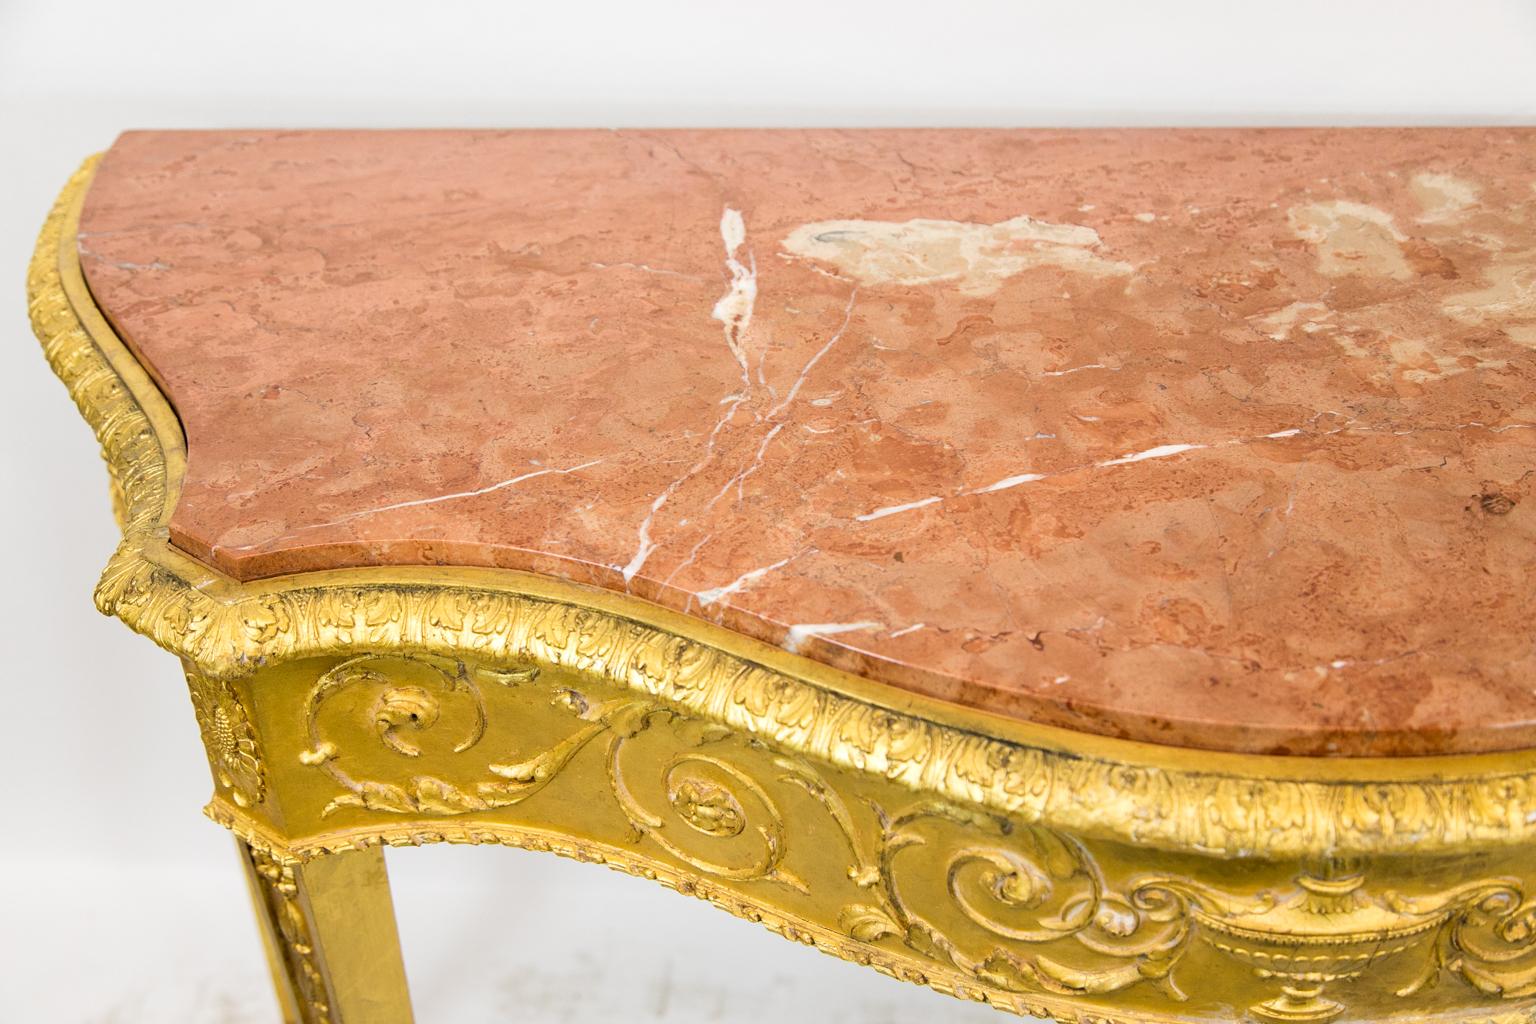 Gesso Serpentine English Marble-Top Gilt Console Table